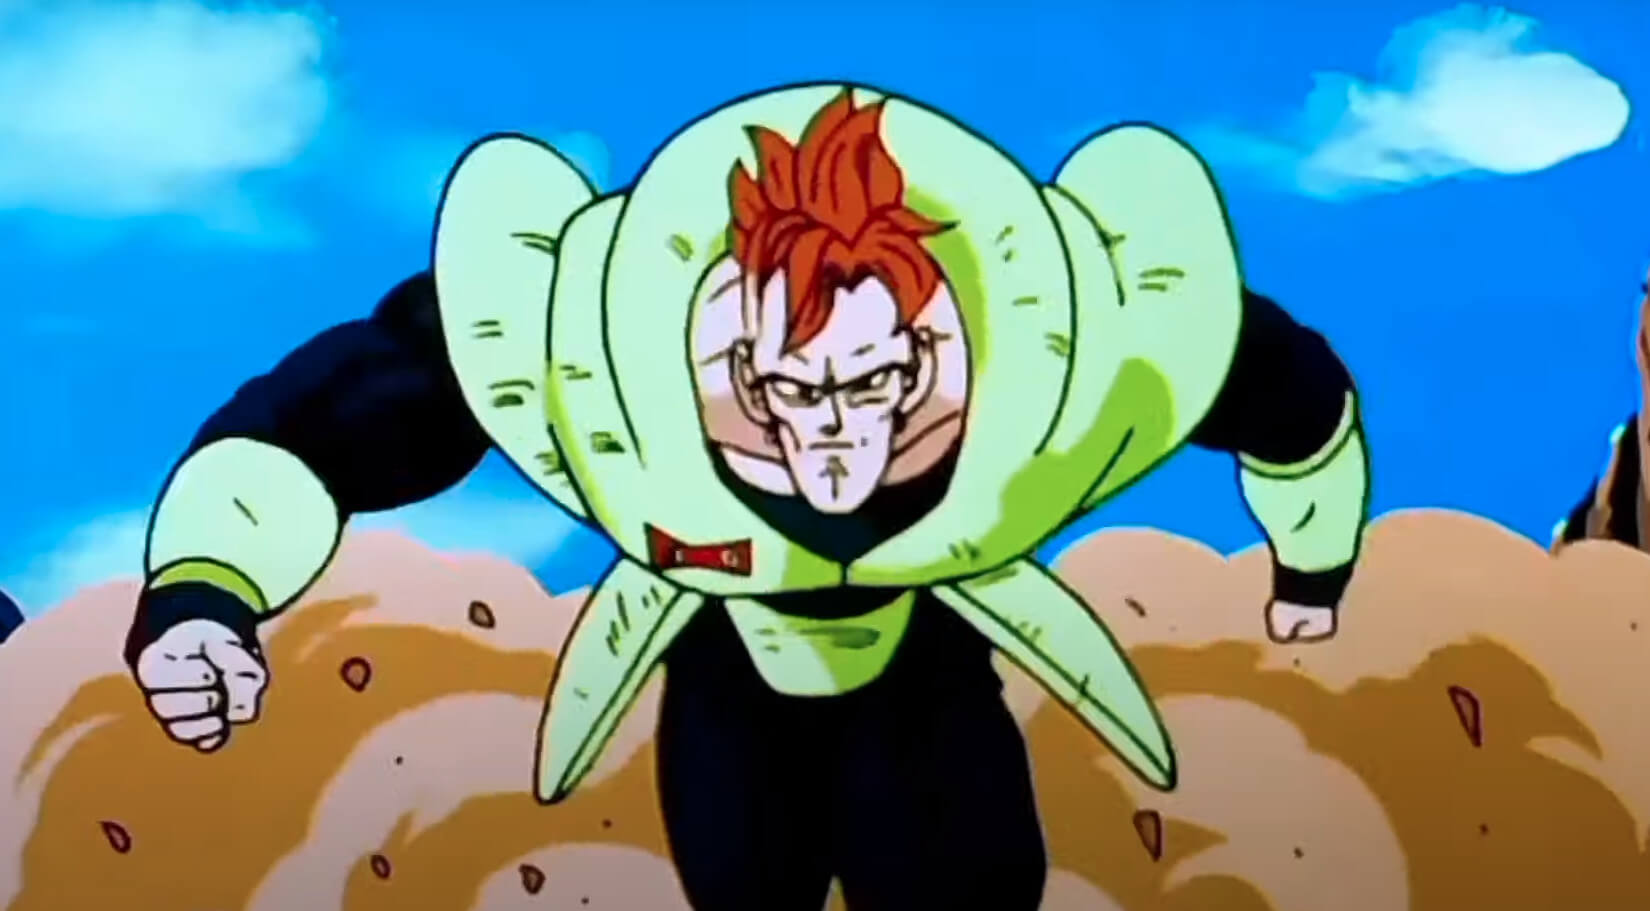 What is Android 16's Real Name? - Dragon Ball Guru